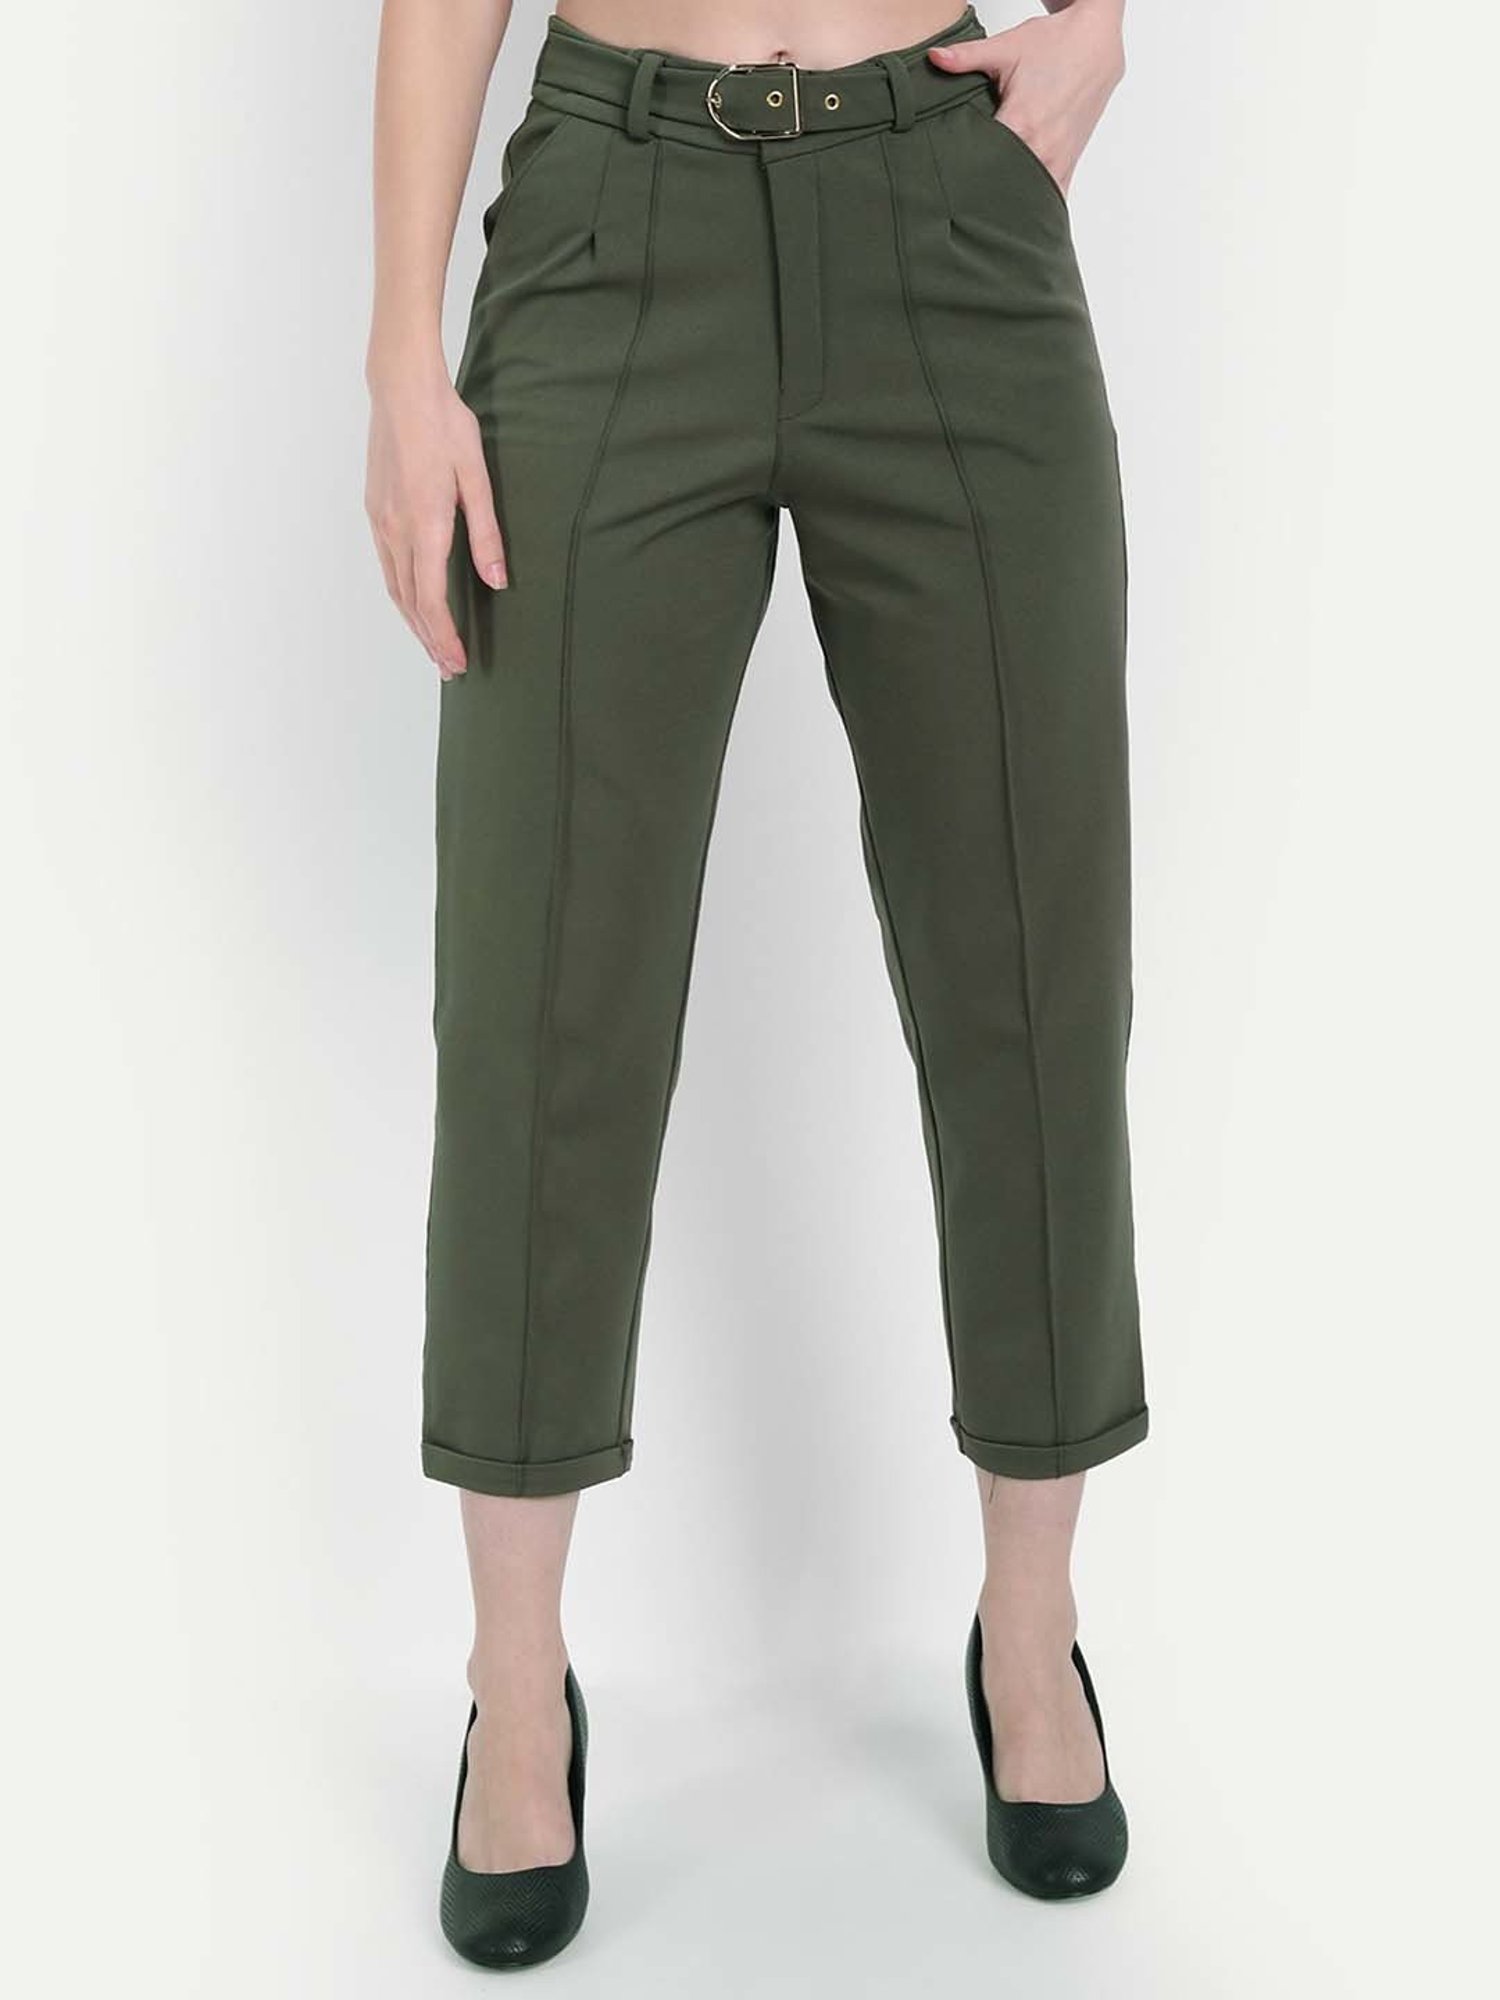 Buy PANIT Women Olive Green Cropped Peg Trousers  Trousers for Women  6993400  Myntra